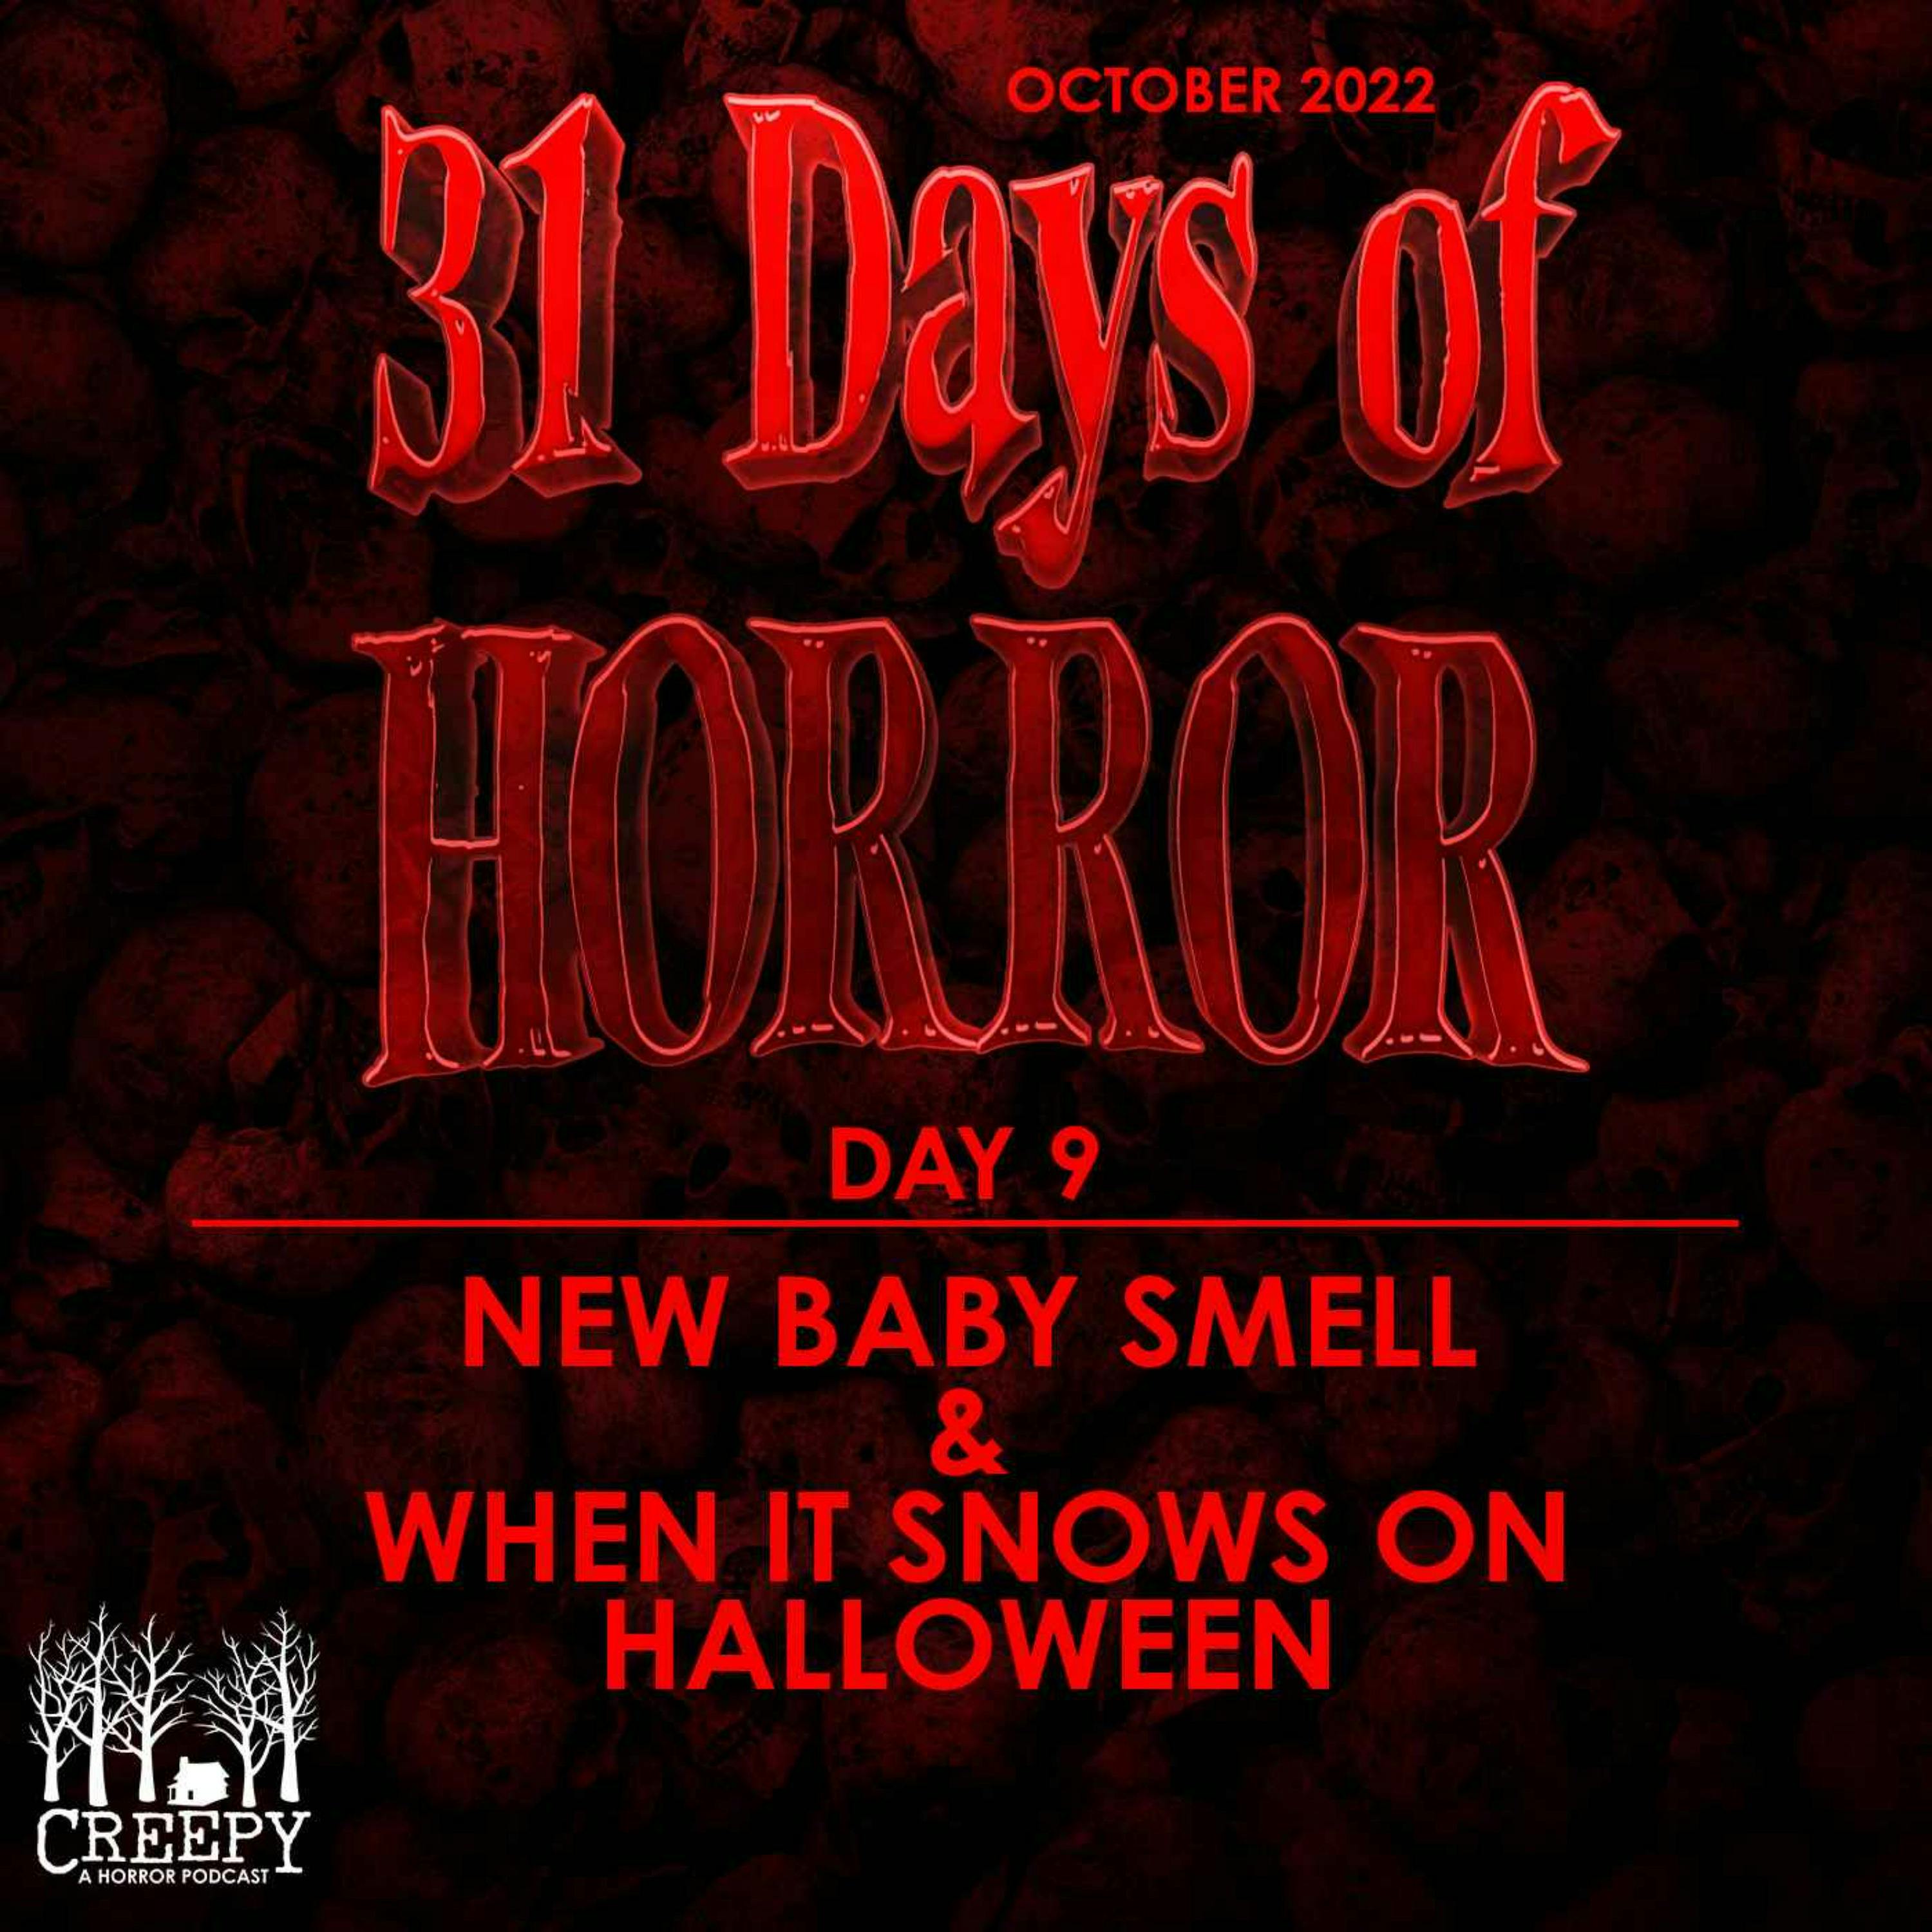 Day 9 - New Baby Smell & When It Snows on Halloween